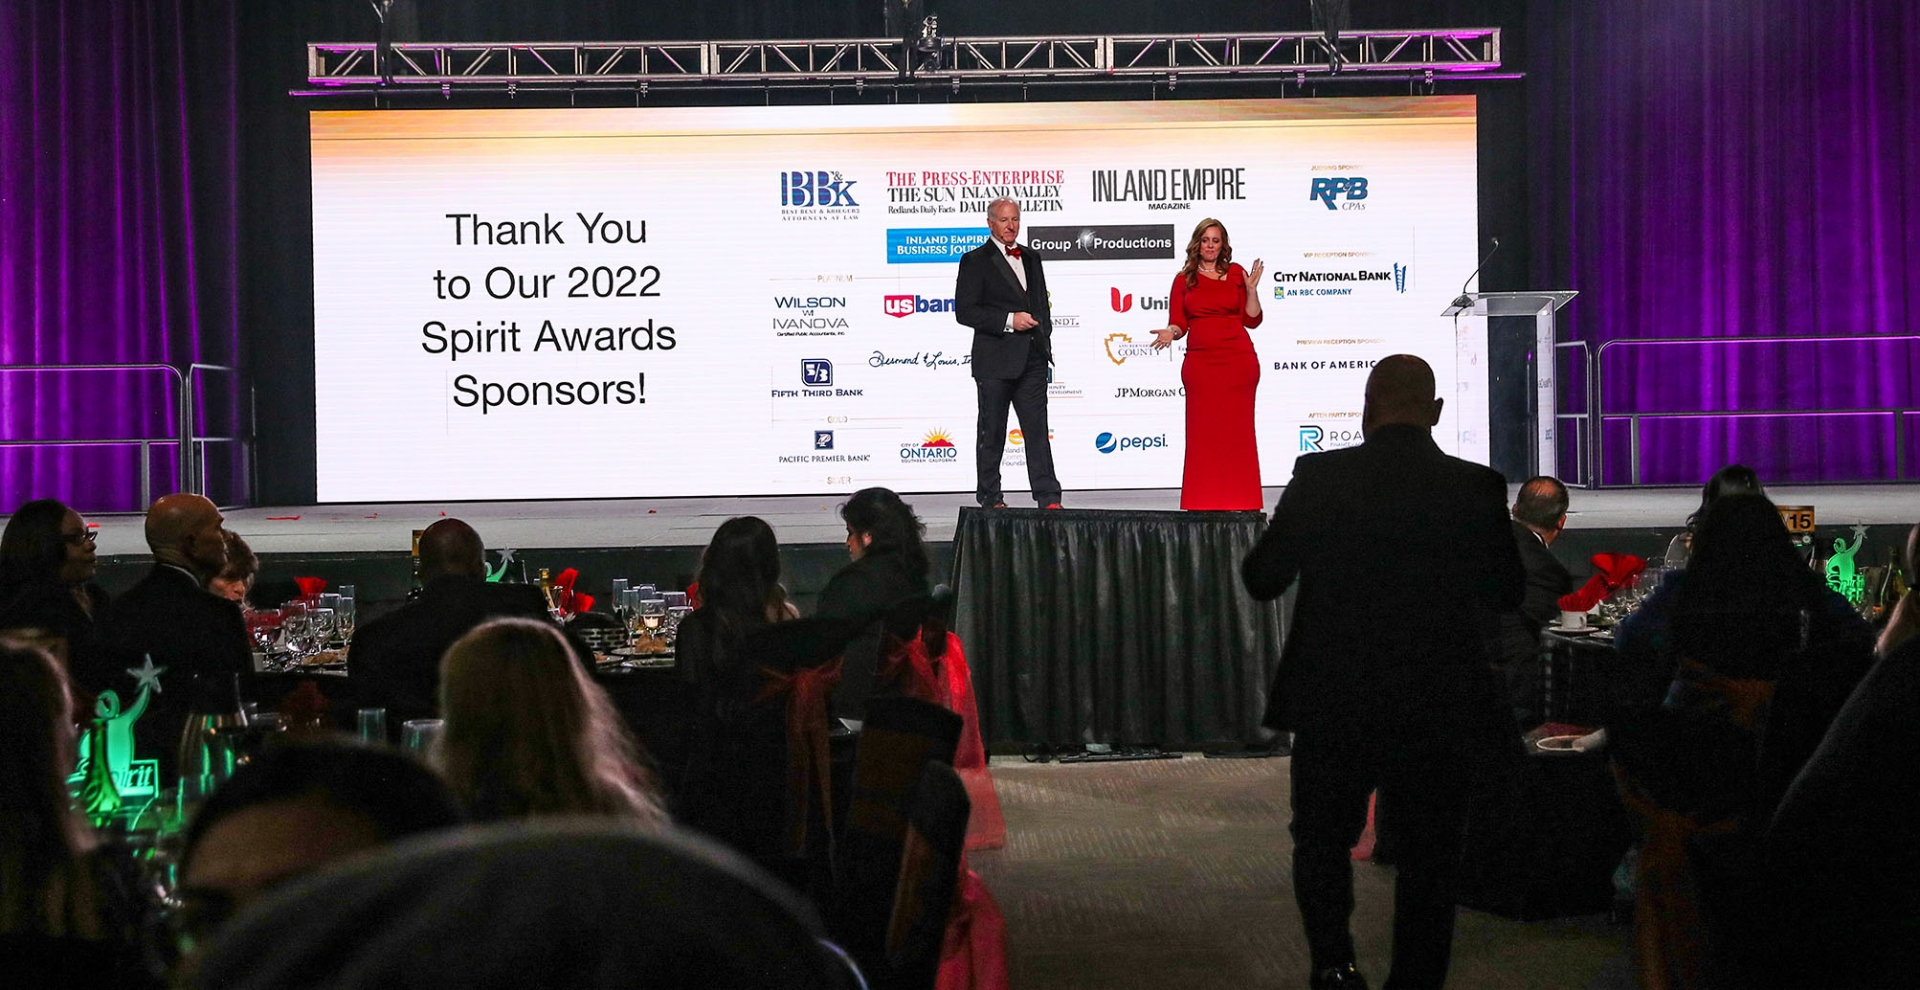 Spirit award sponsors are displayed on signage on the stage.